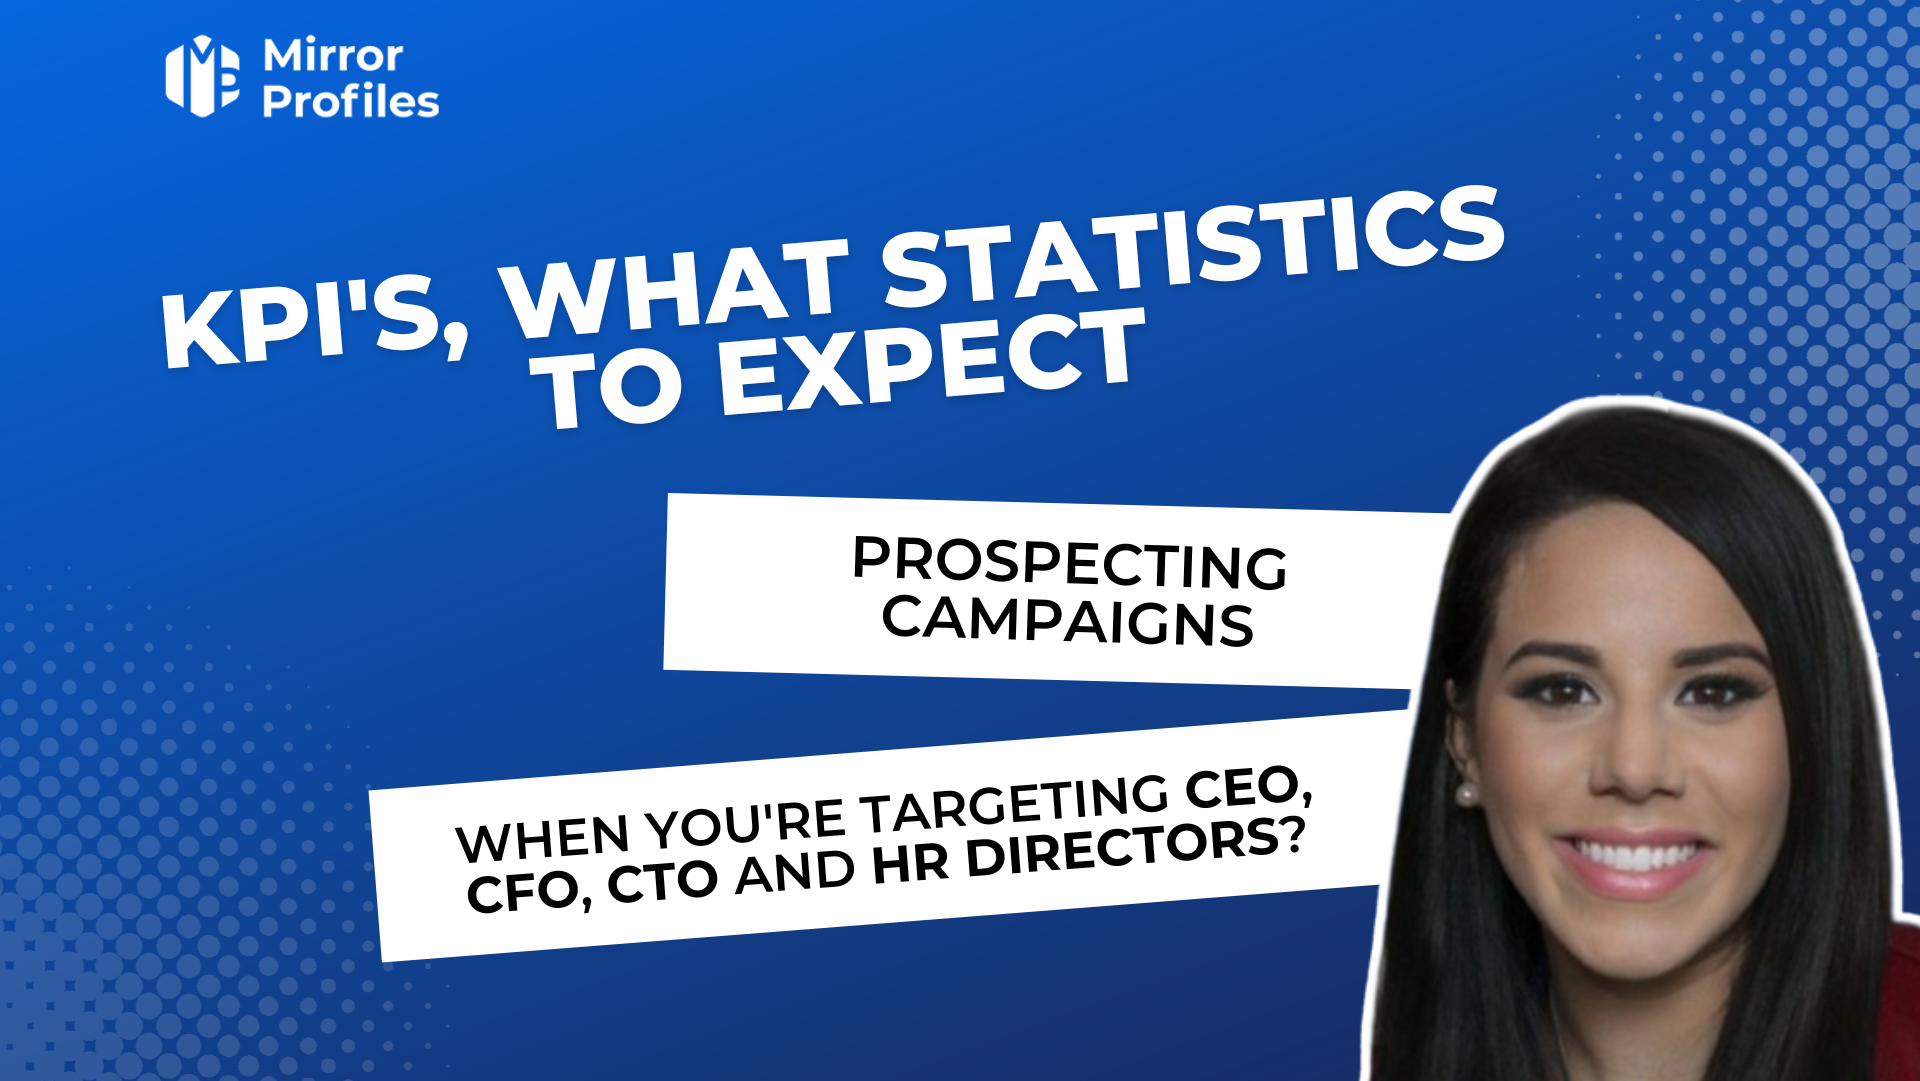 KPI'S, what statistics can you expect from prospecting campaigns targeting CEOs, CFOs, CTOs and HR directors?